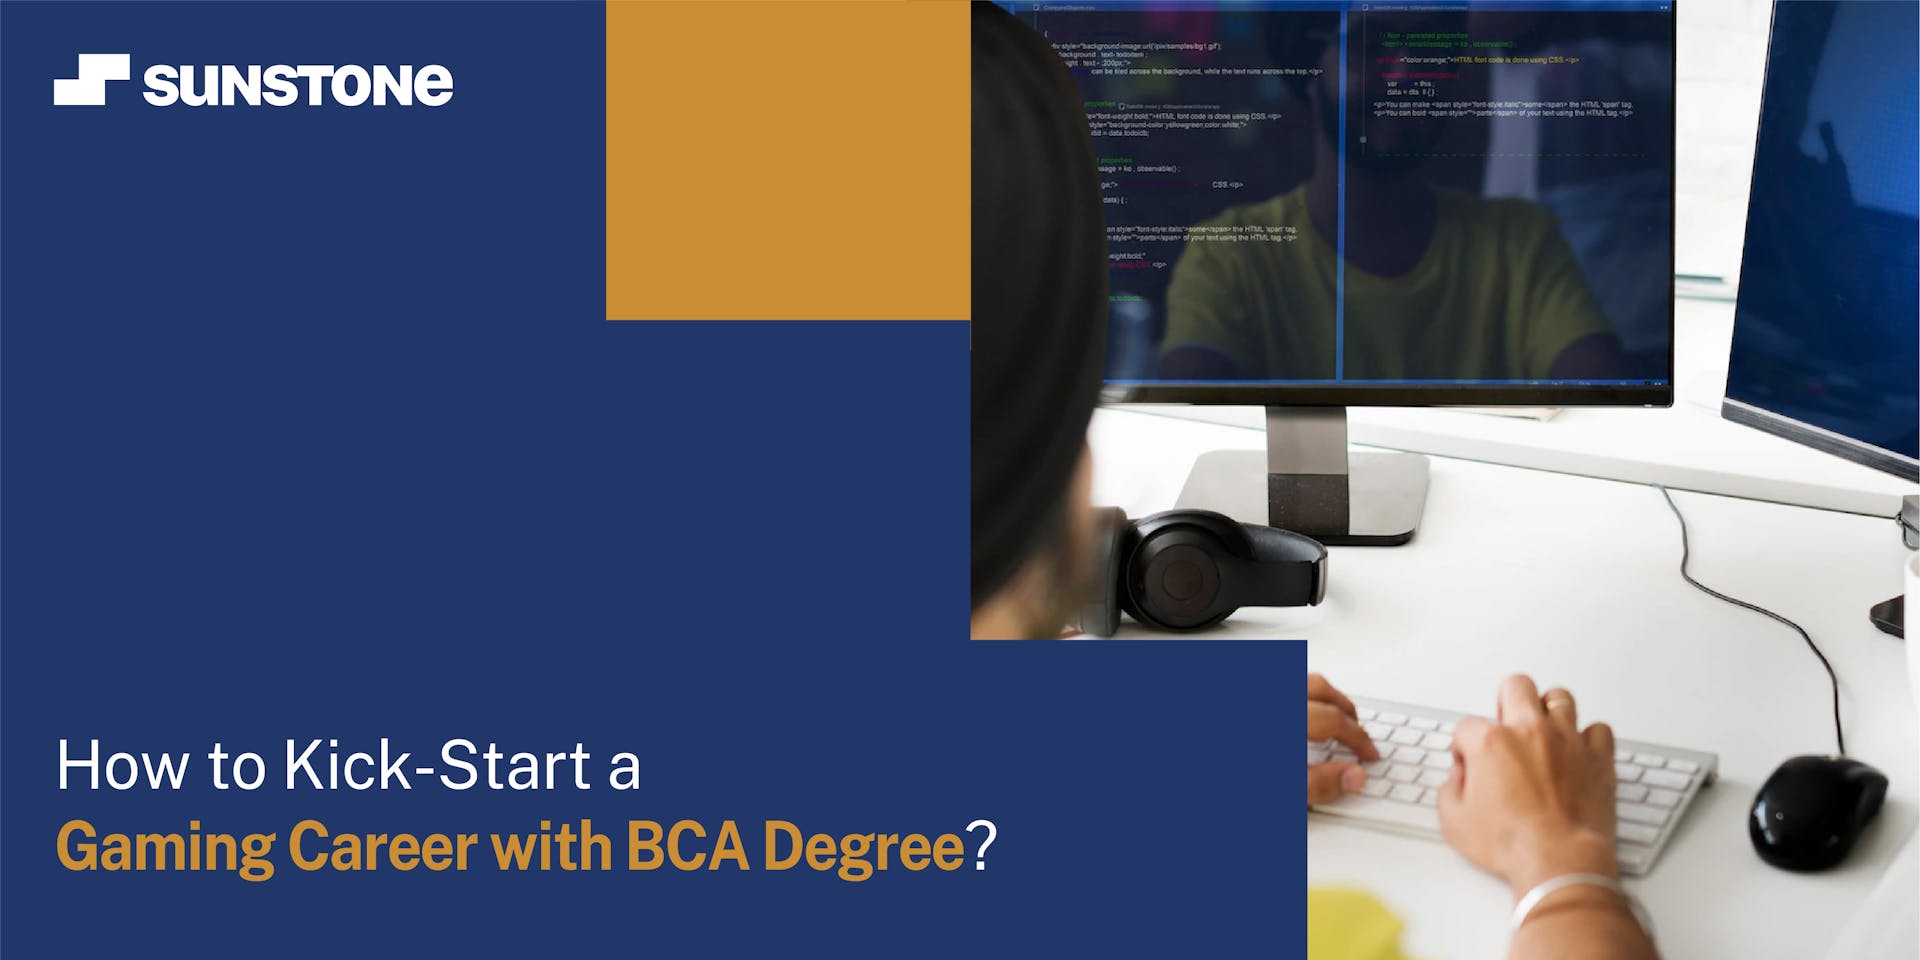 How to Pursue a Career in Gaming after BCA?